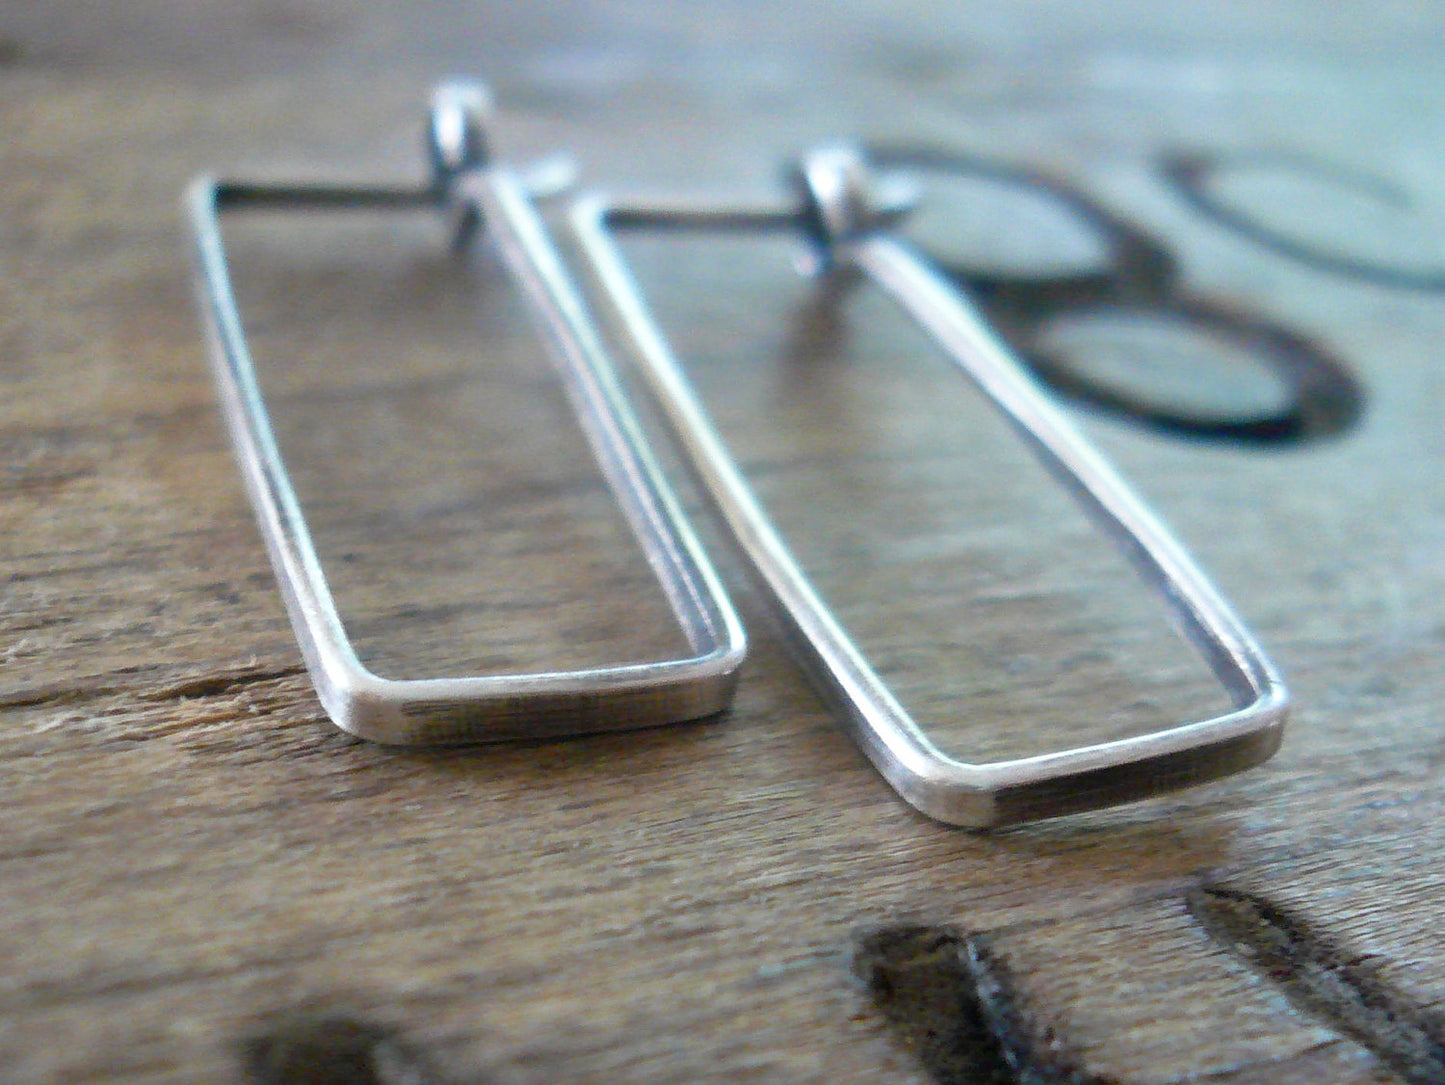 Svelte Hoops Small - Handmade. Hand forged. Oxidized Sterling Silver Earrings